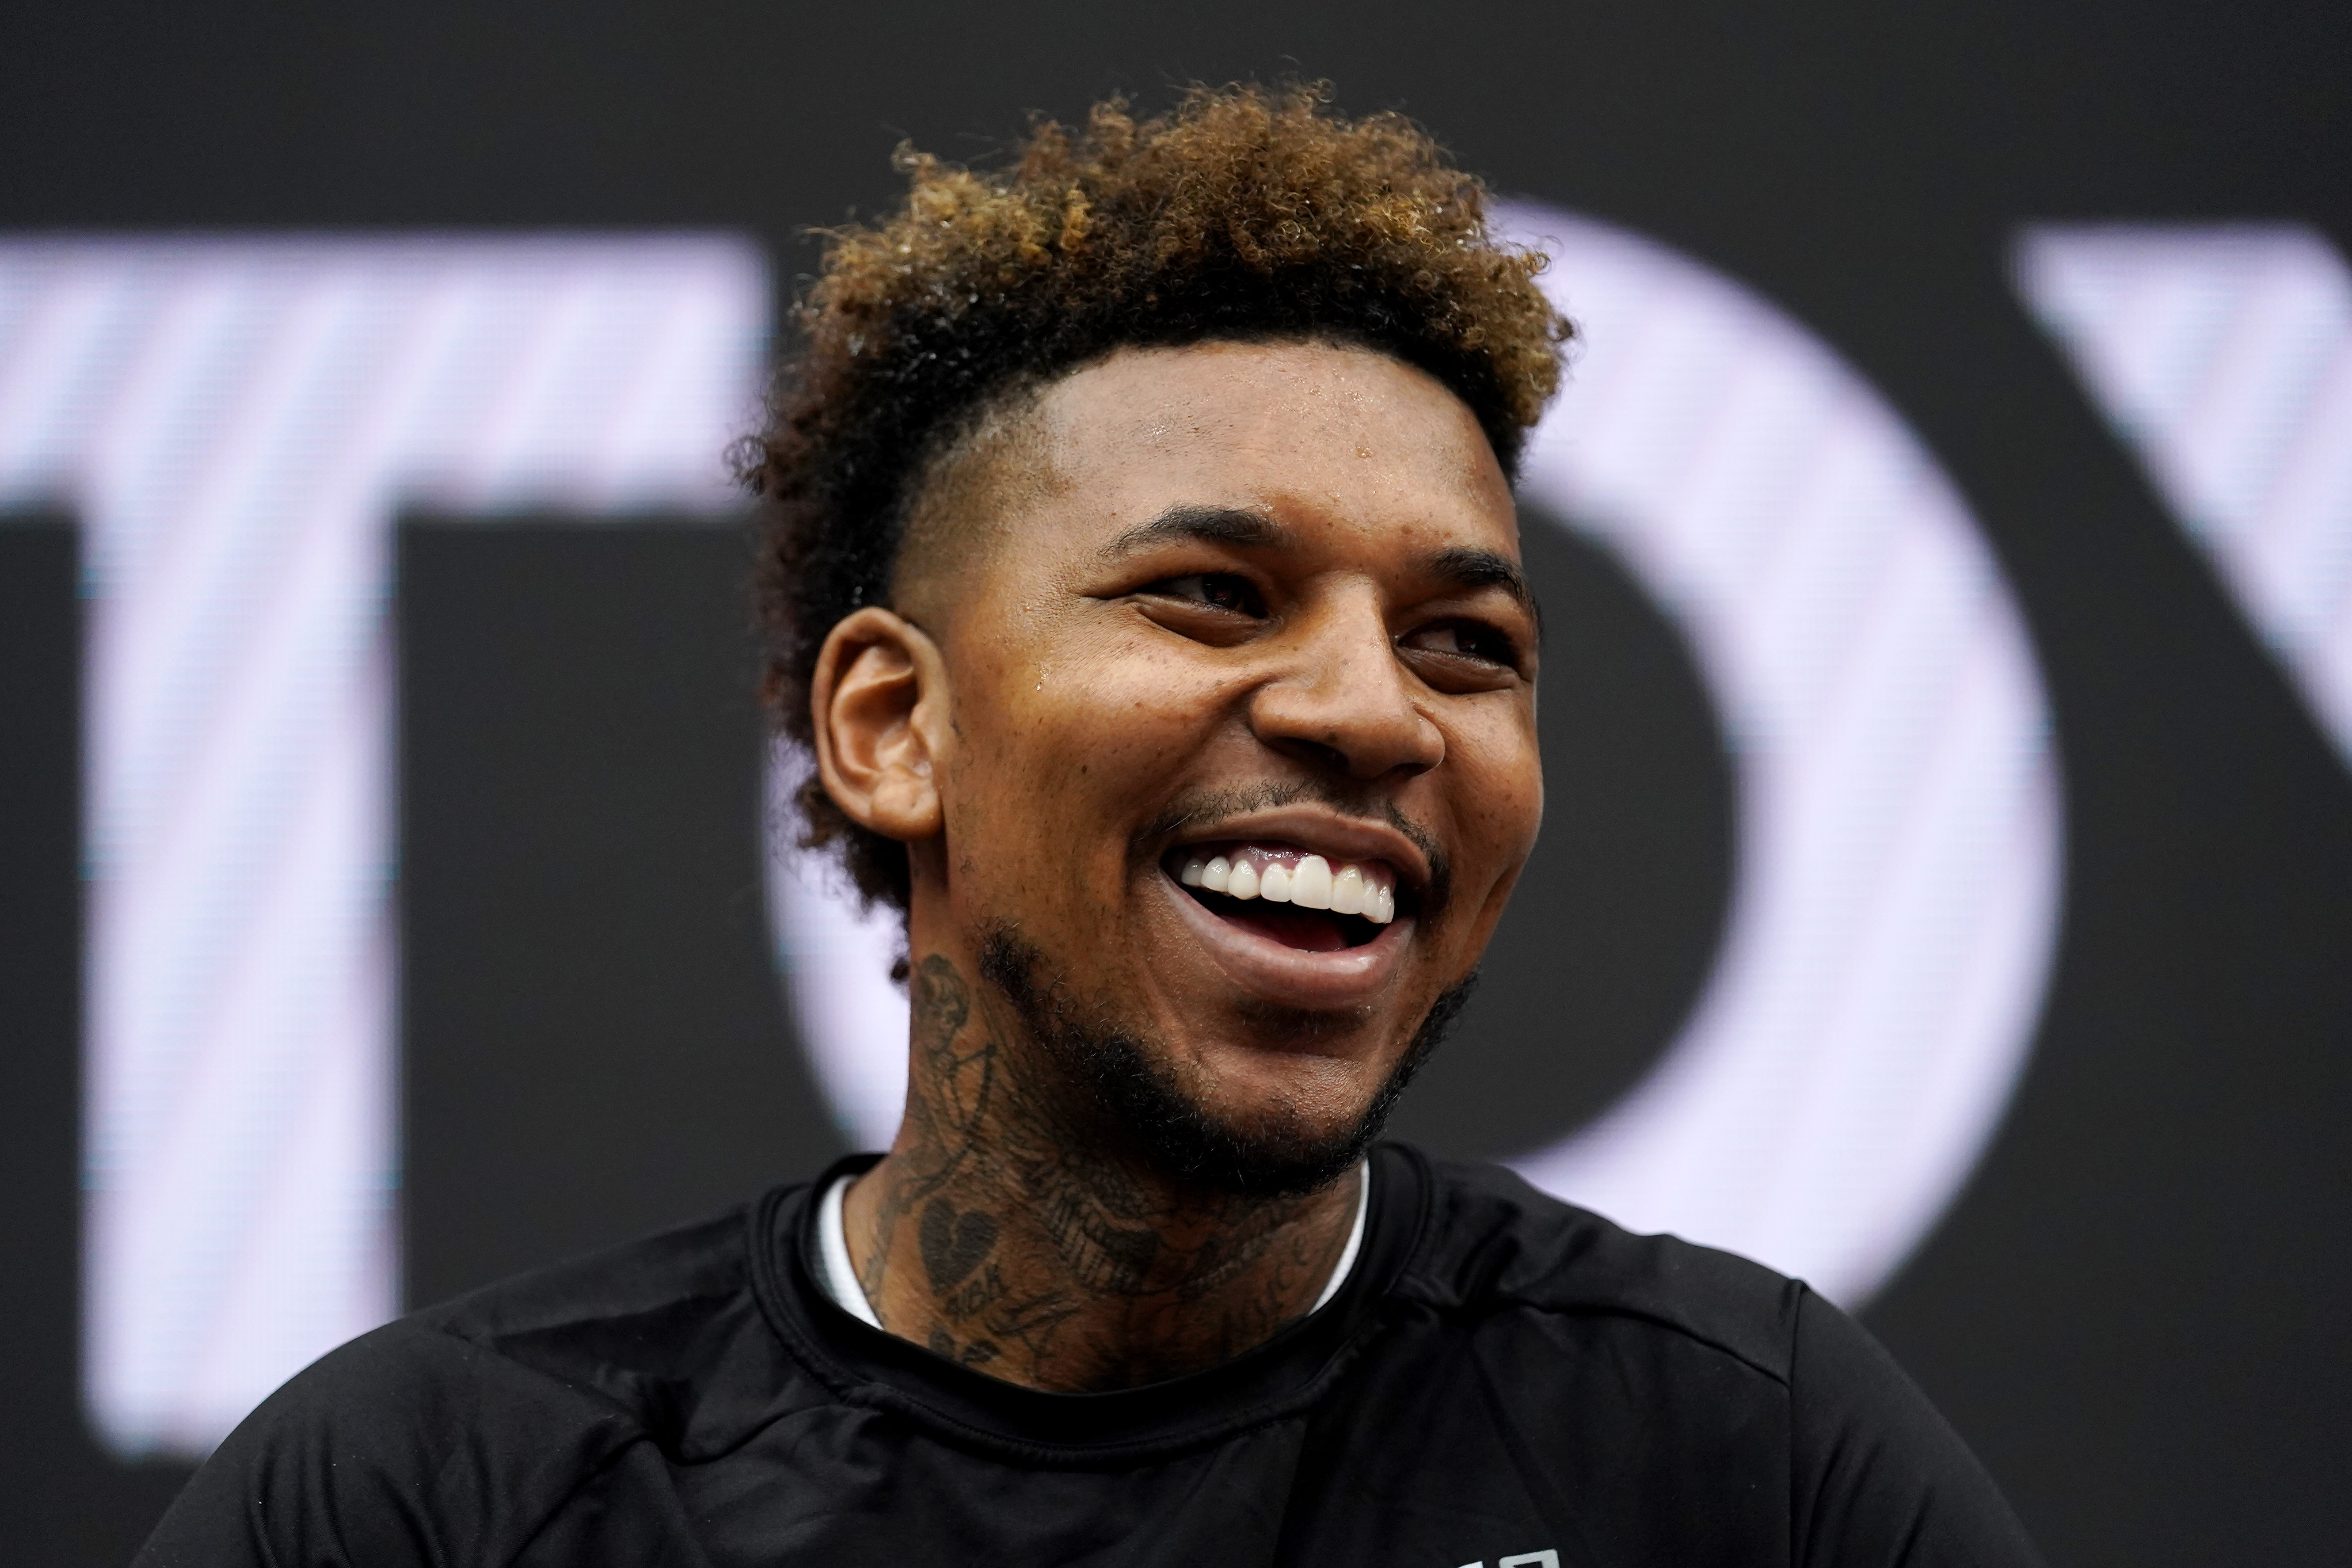 Nick Young Reveals Ice Cube’s BIG3 Didn’t Pay Him On Time